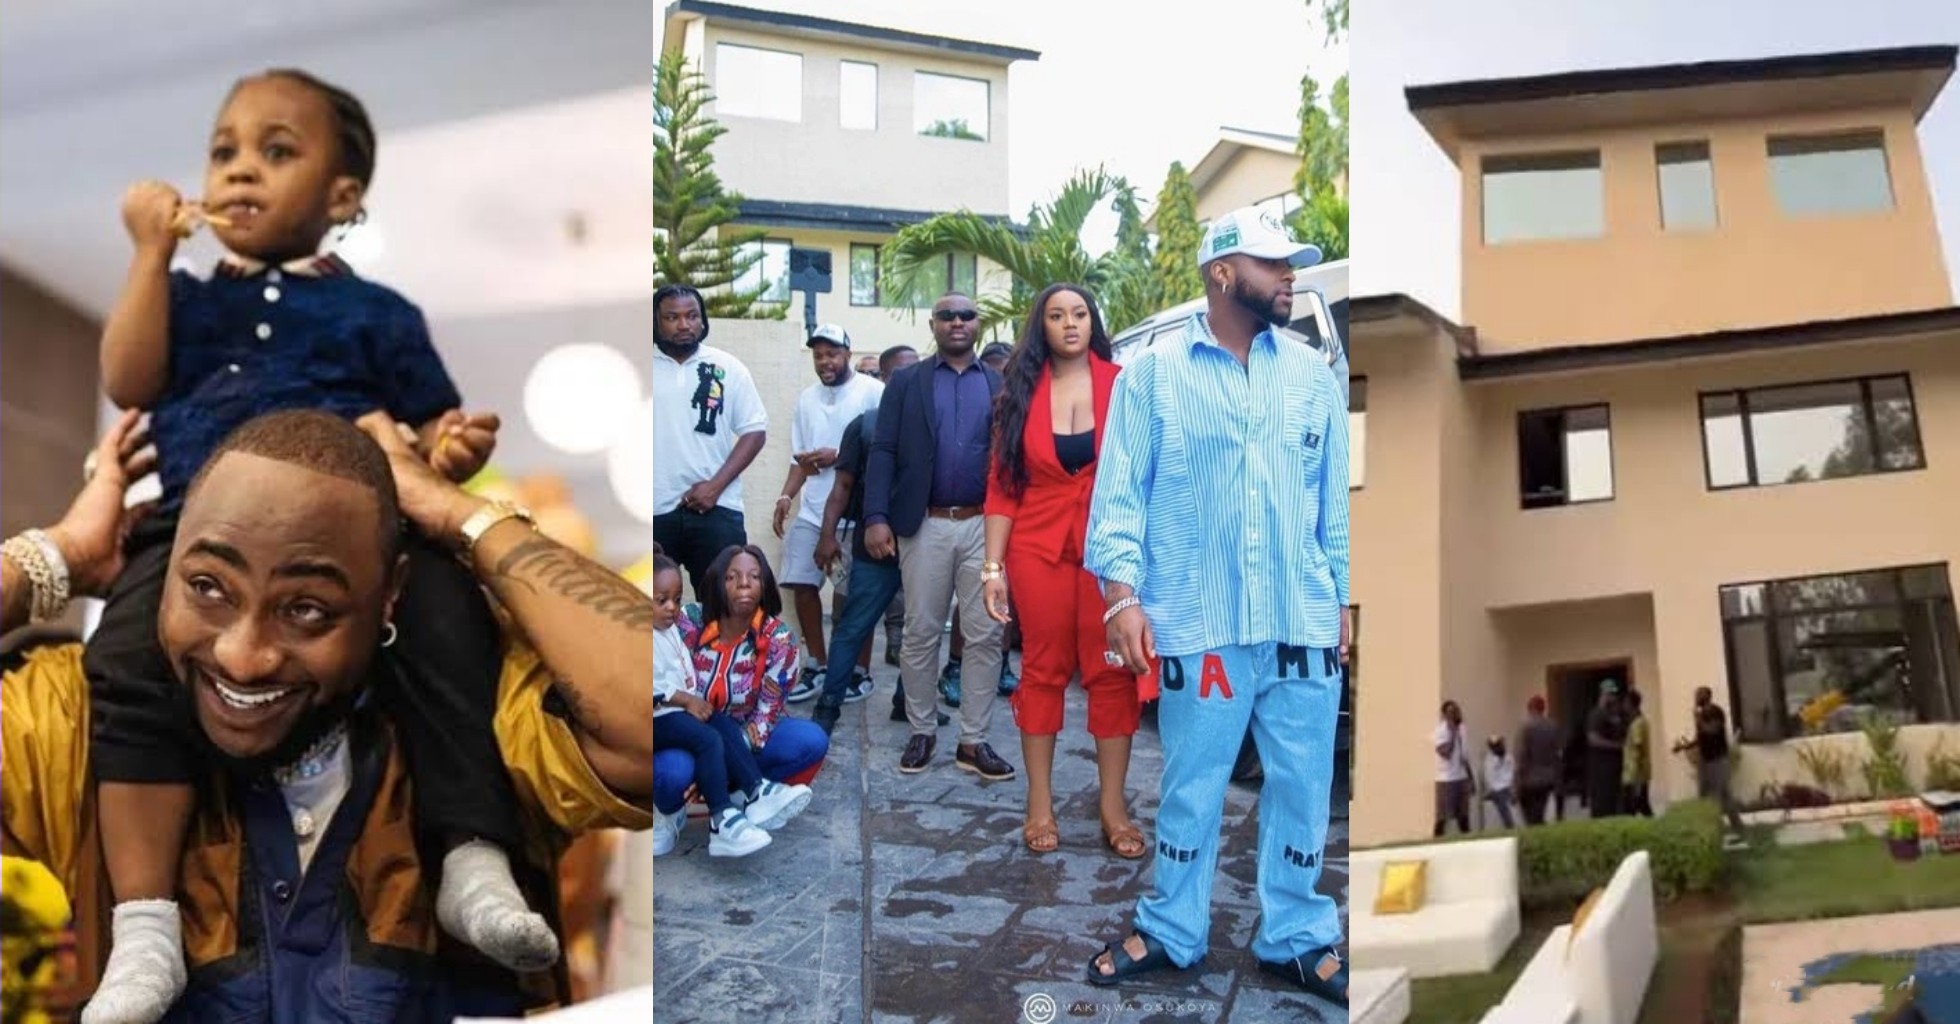 Police reportedly arrests Davido’s house occupants over death of Singer’s son, Ifeanyi